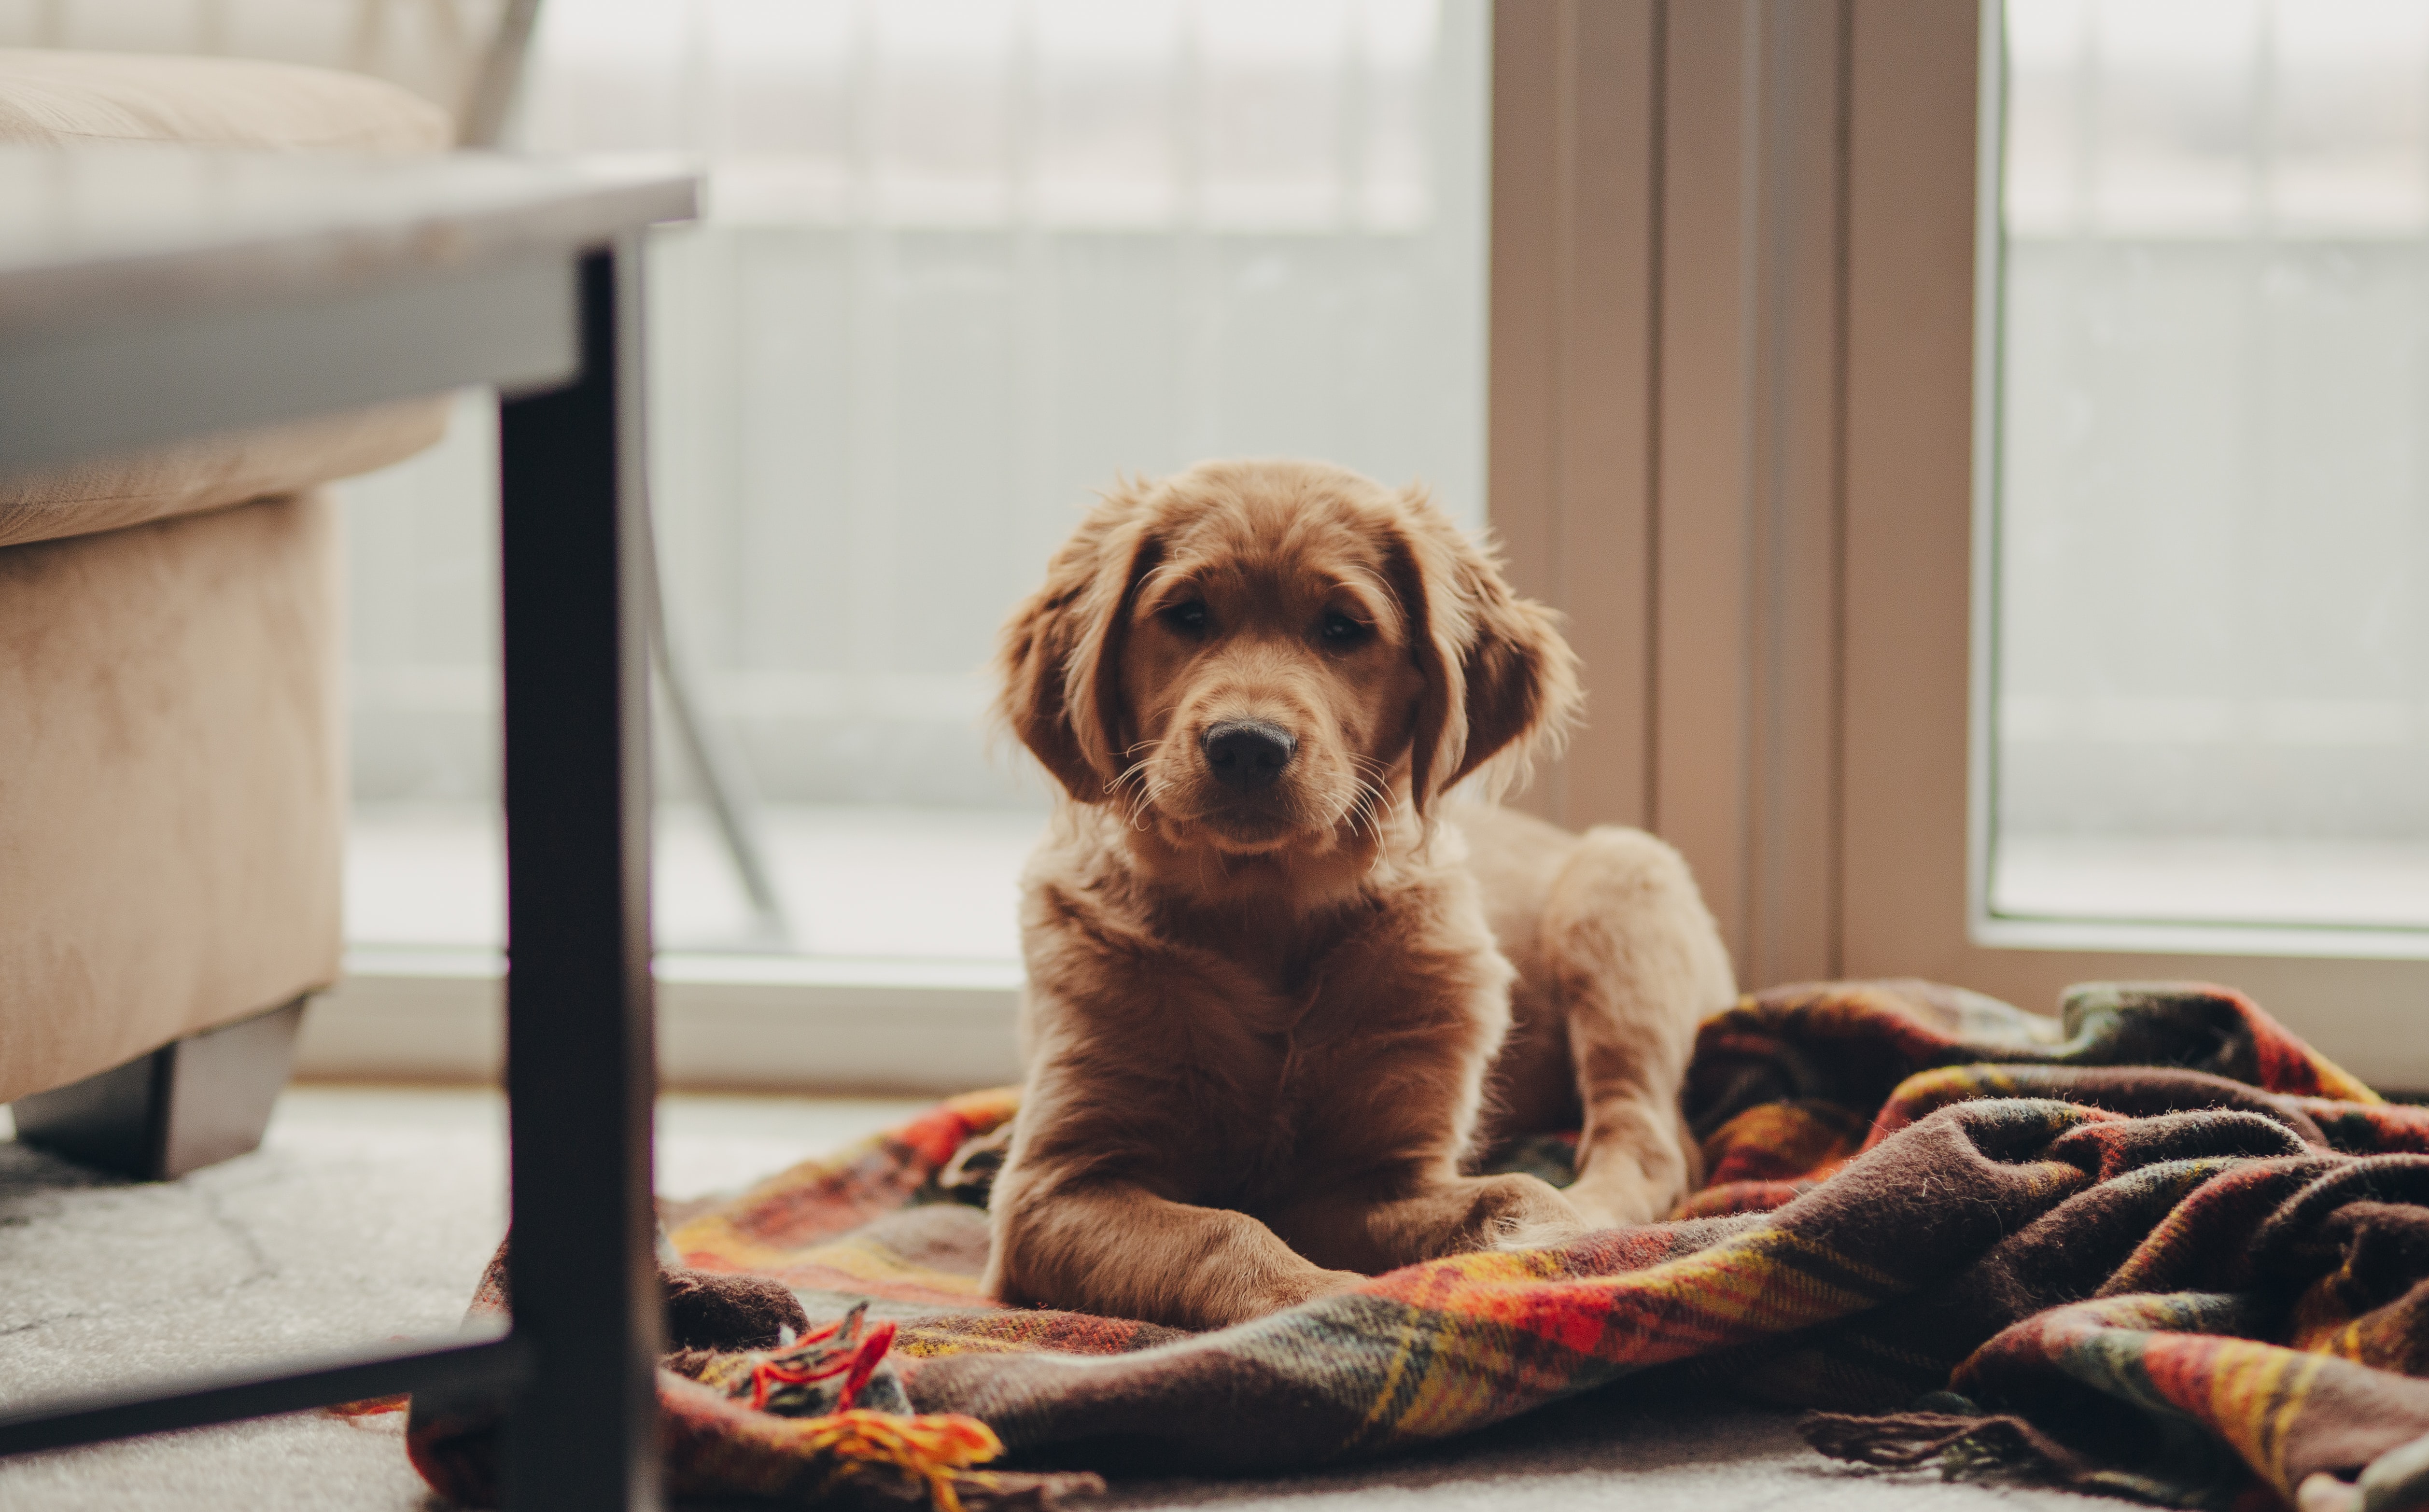 Do Pet-Friendly Rentals Have Higher Cleaning Fees?